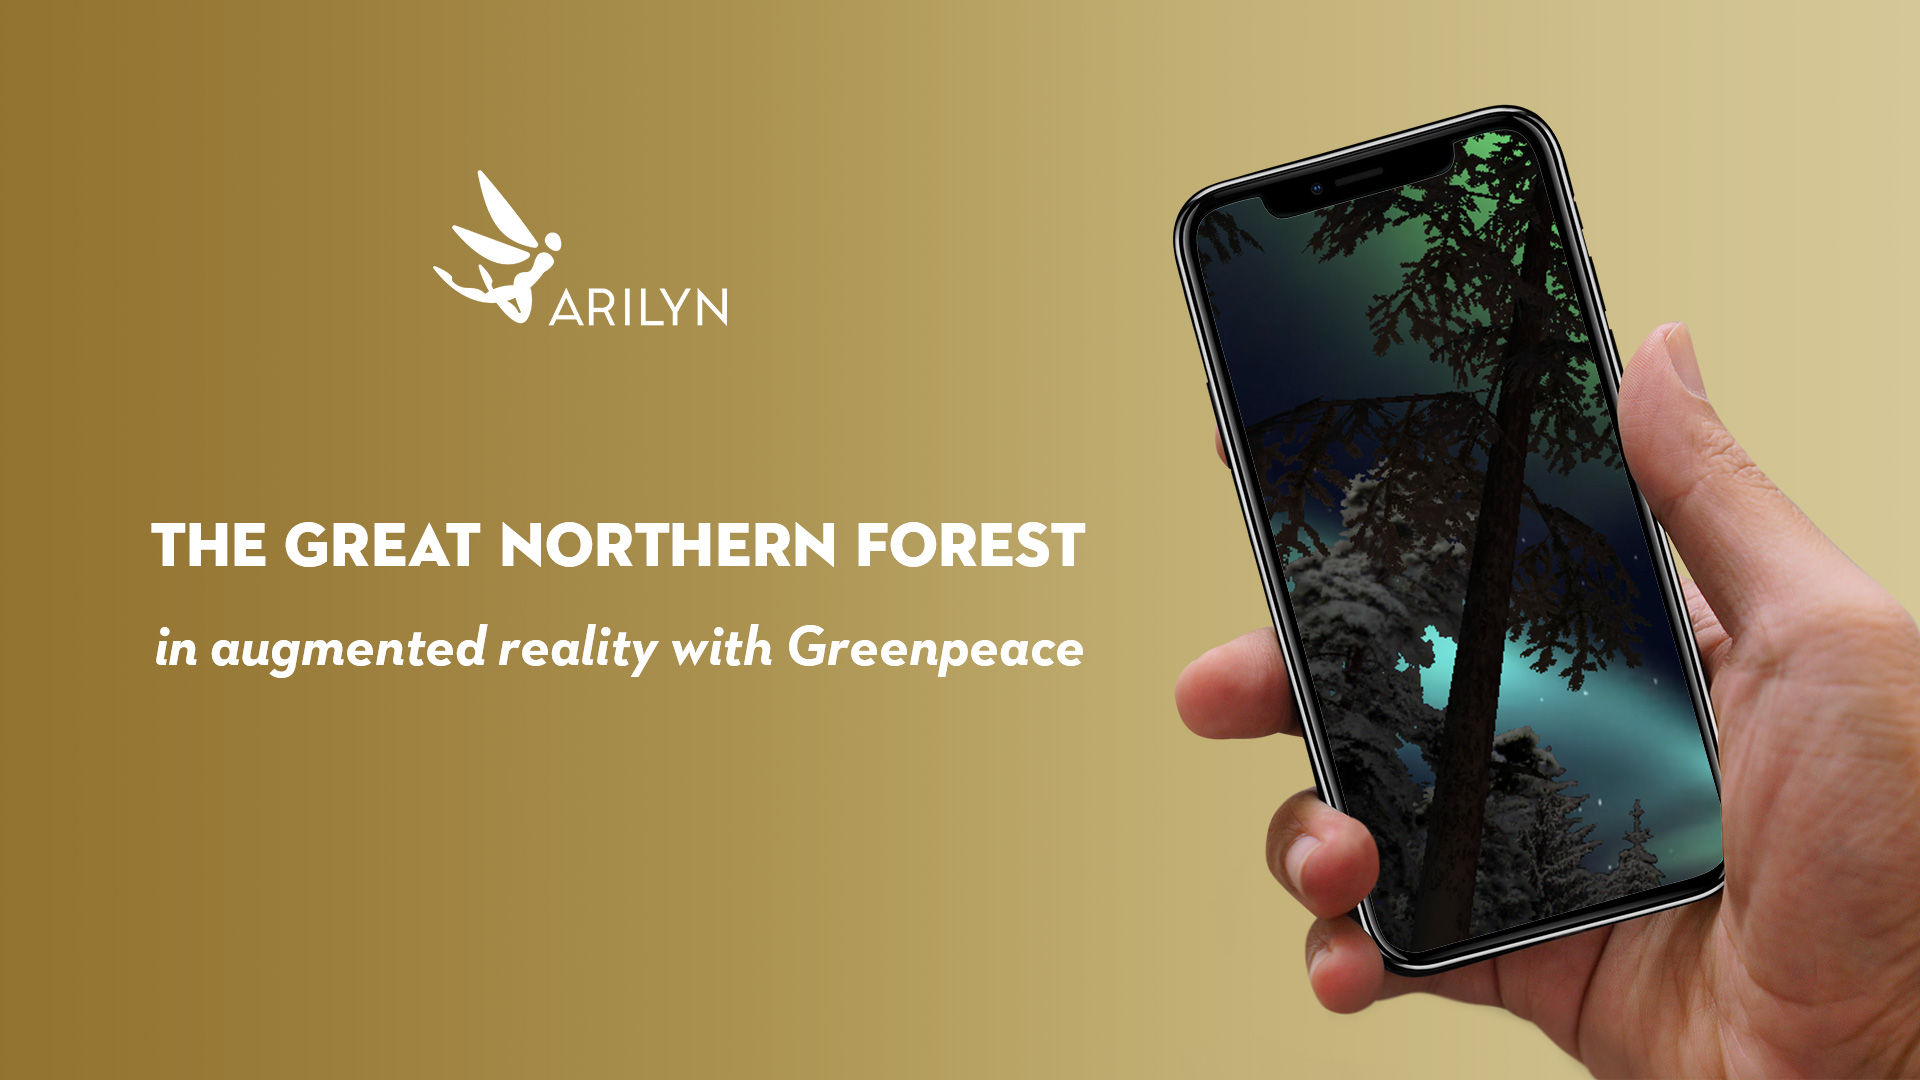 Greenpeace uses AR to save the Great Northern Forests